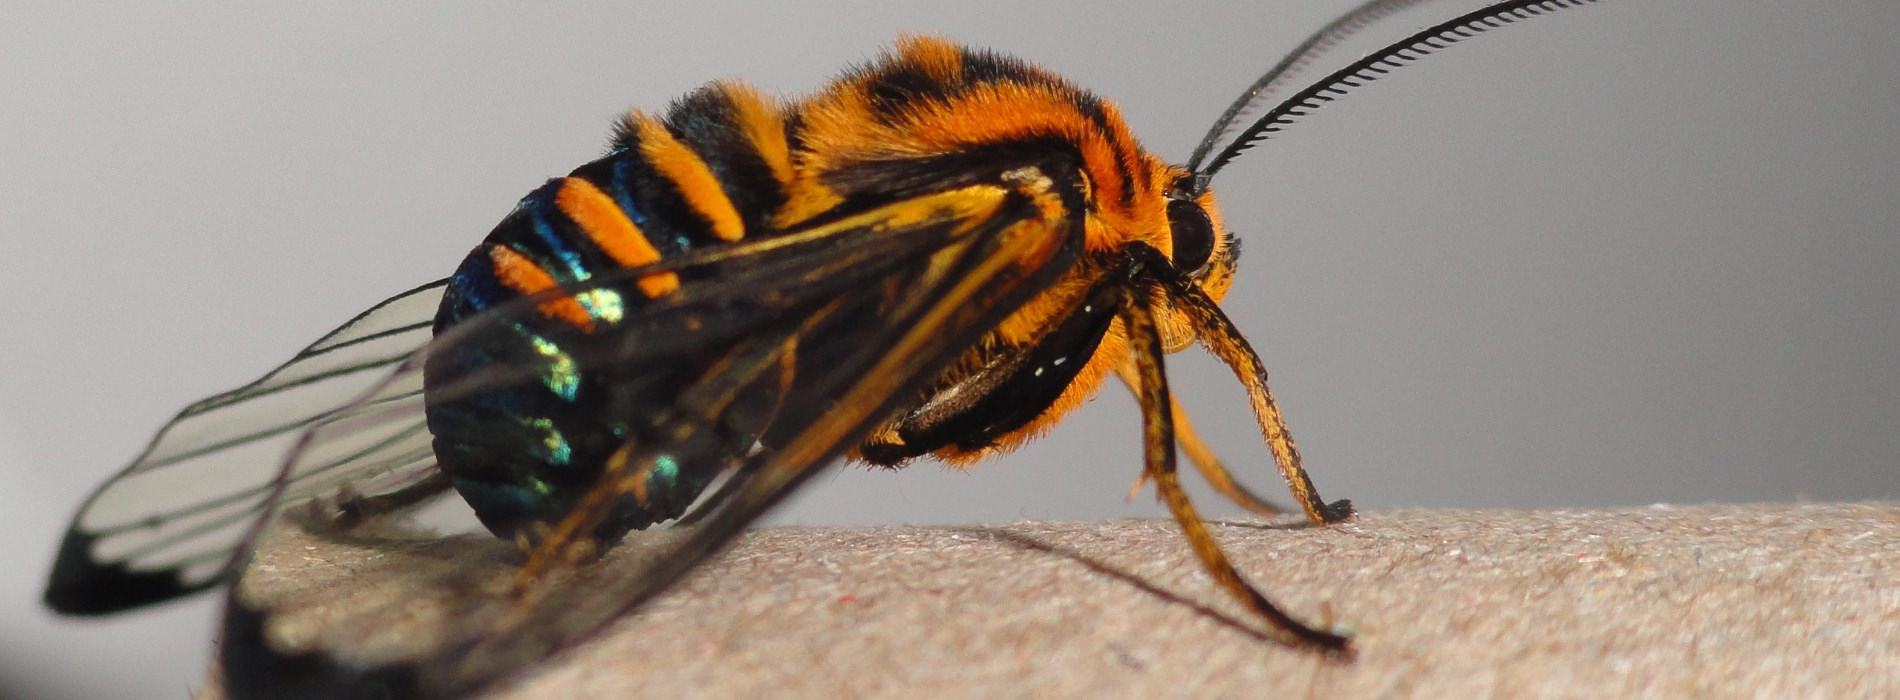 Close up of a black and yellow flying insect